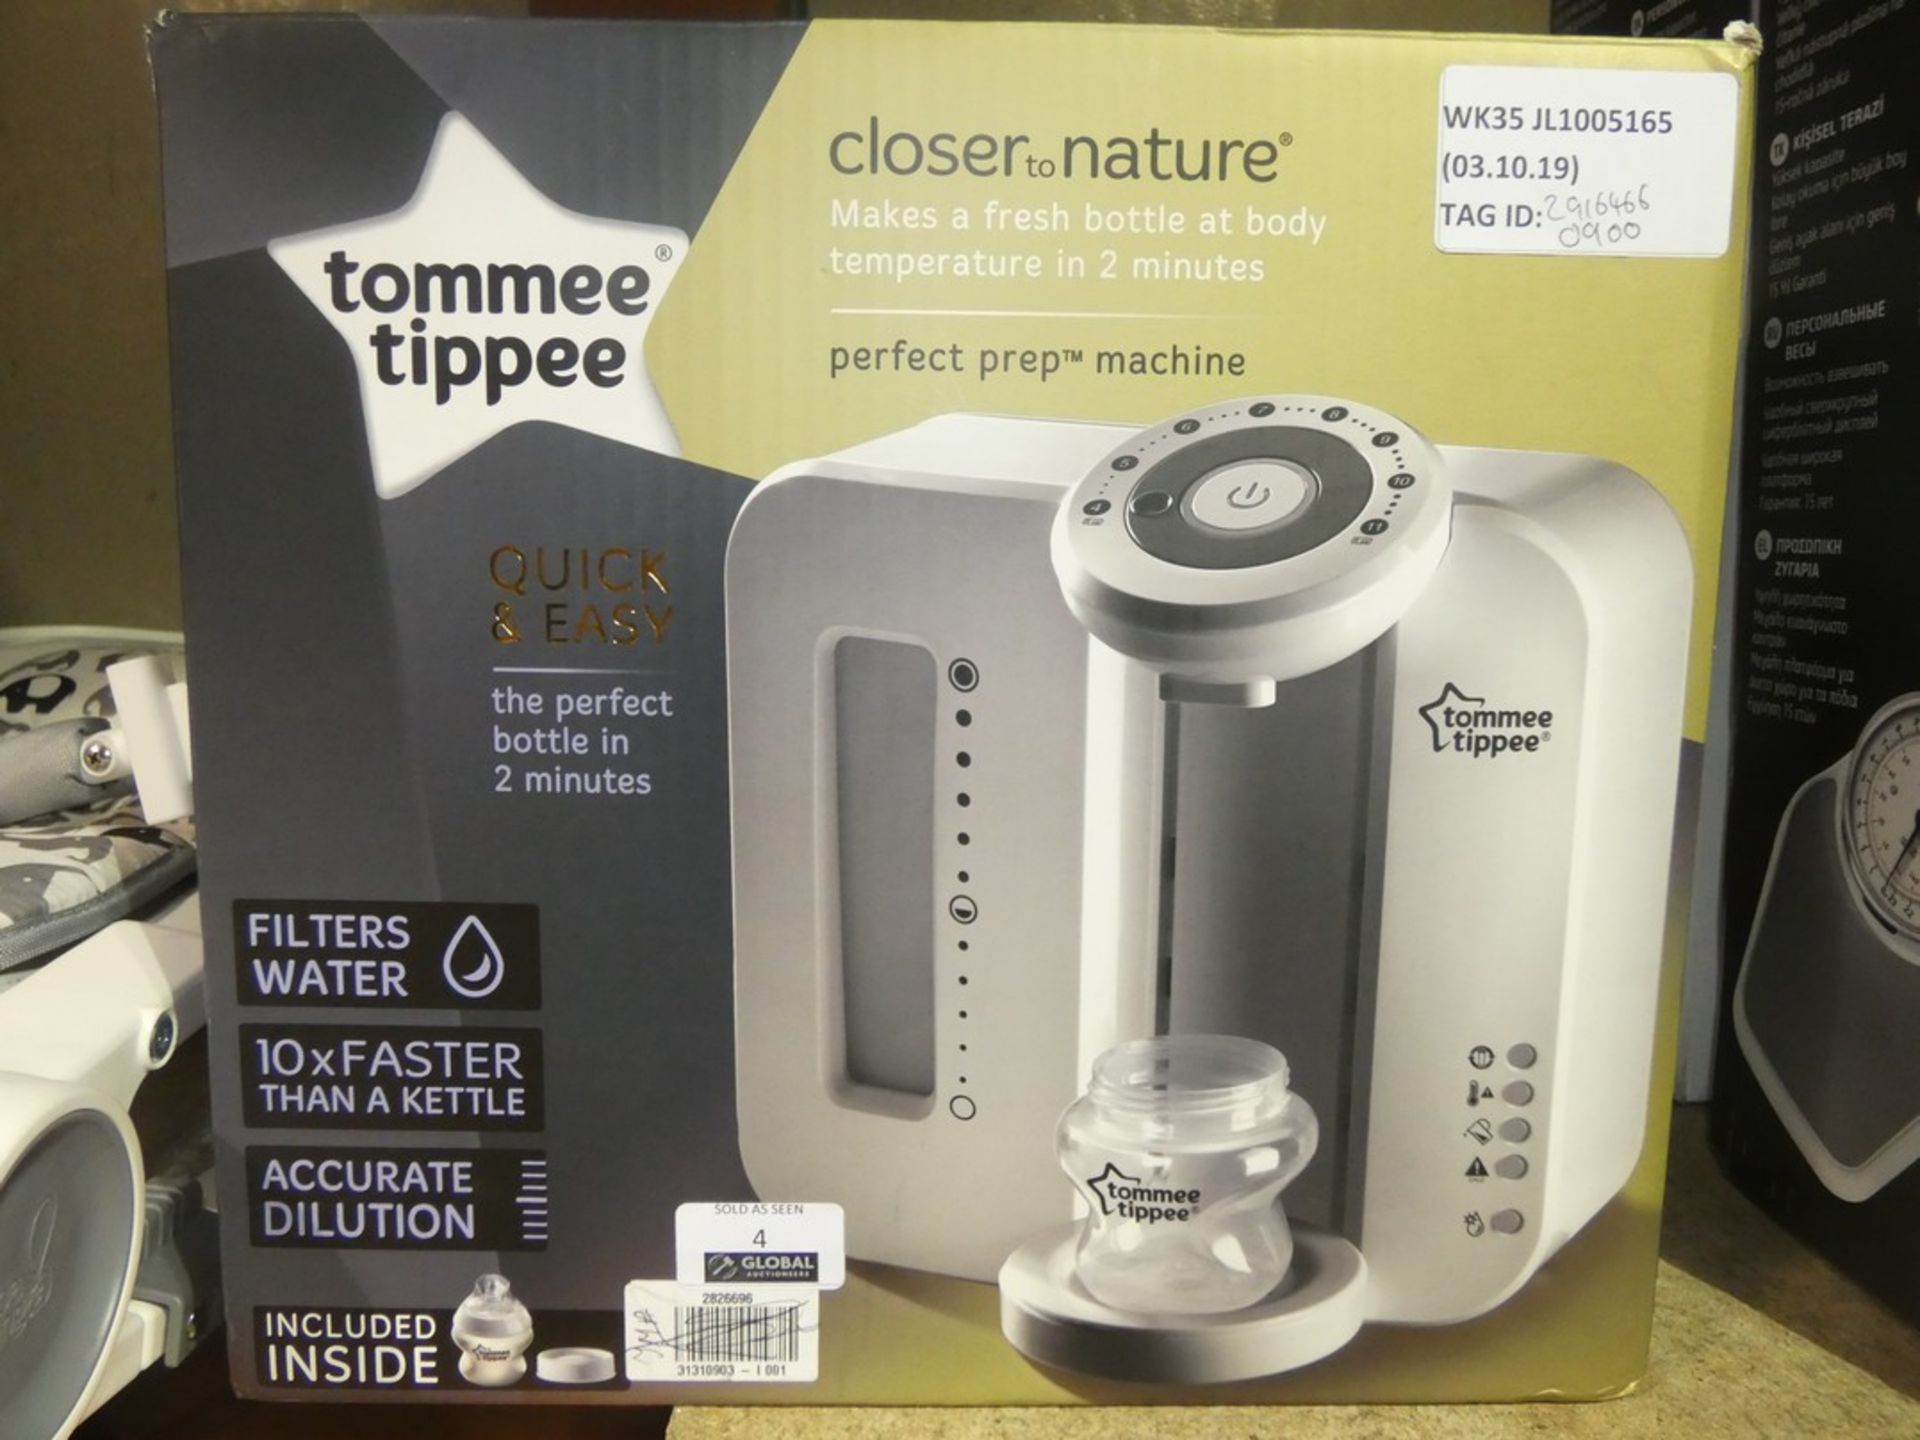 Tommee Tippee Closure To Nature Quick And Easy Perfect Preparation Machine RRP £90 (2916466) (Public